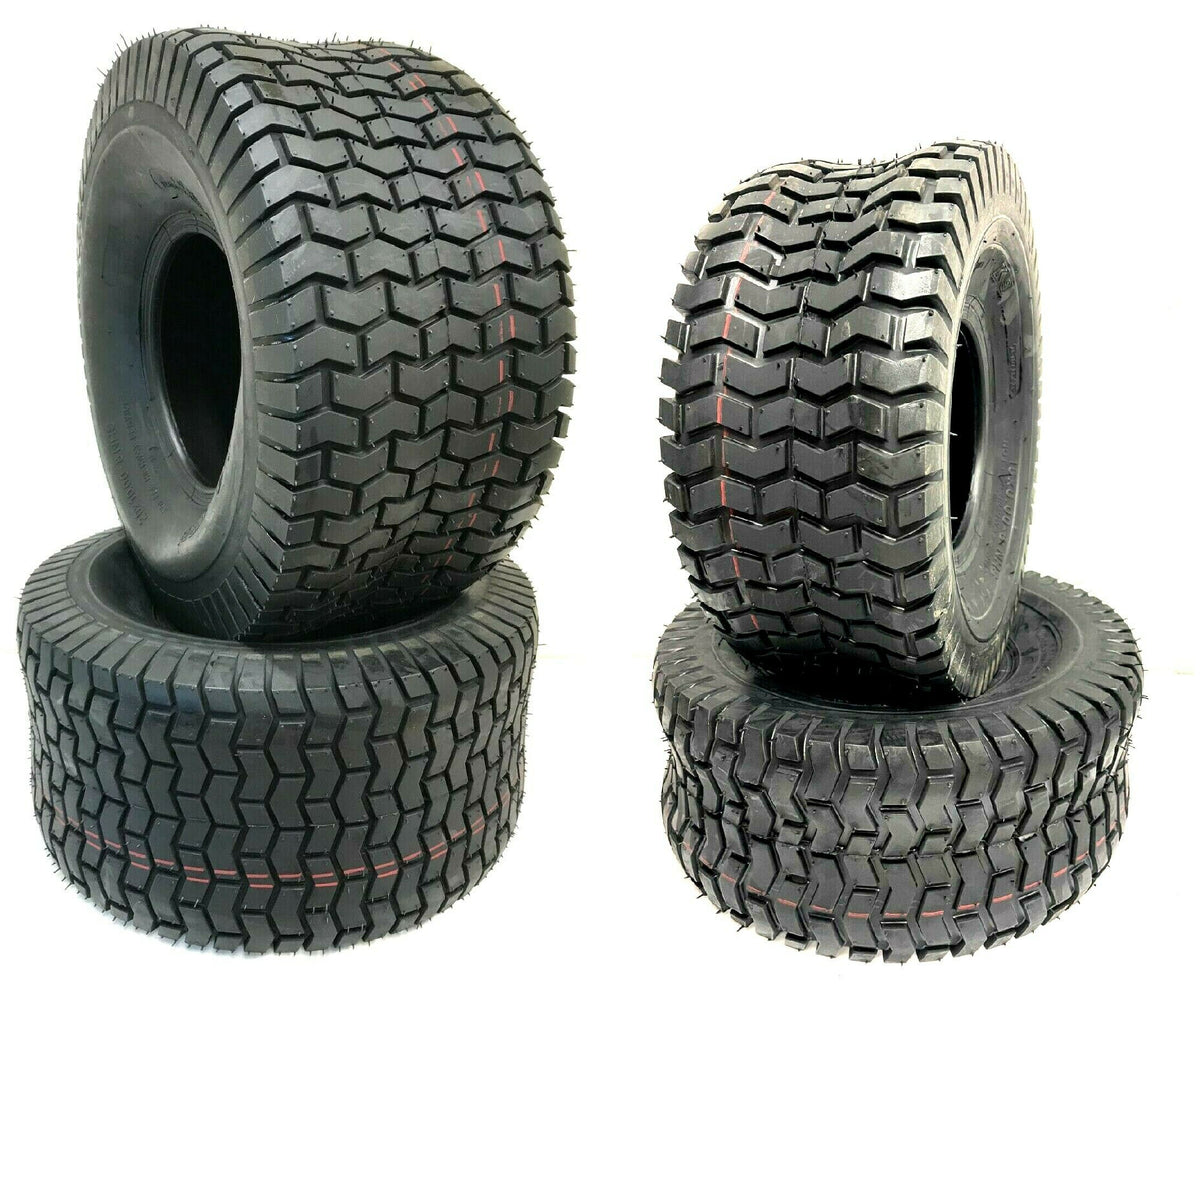 Pack of 2, Tires 4.10/3.50-4, Sawtooth, 4 Ply, Tubeless, Lawn Garden Tires